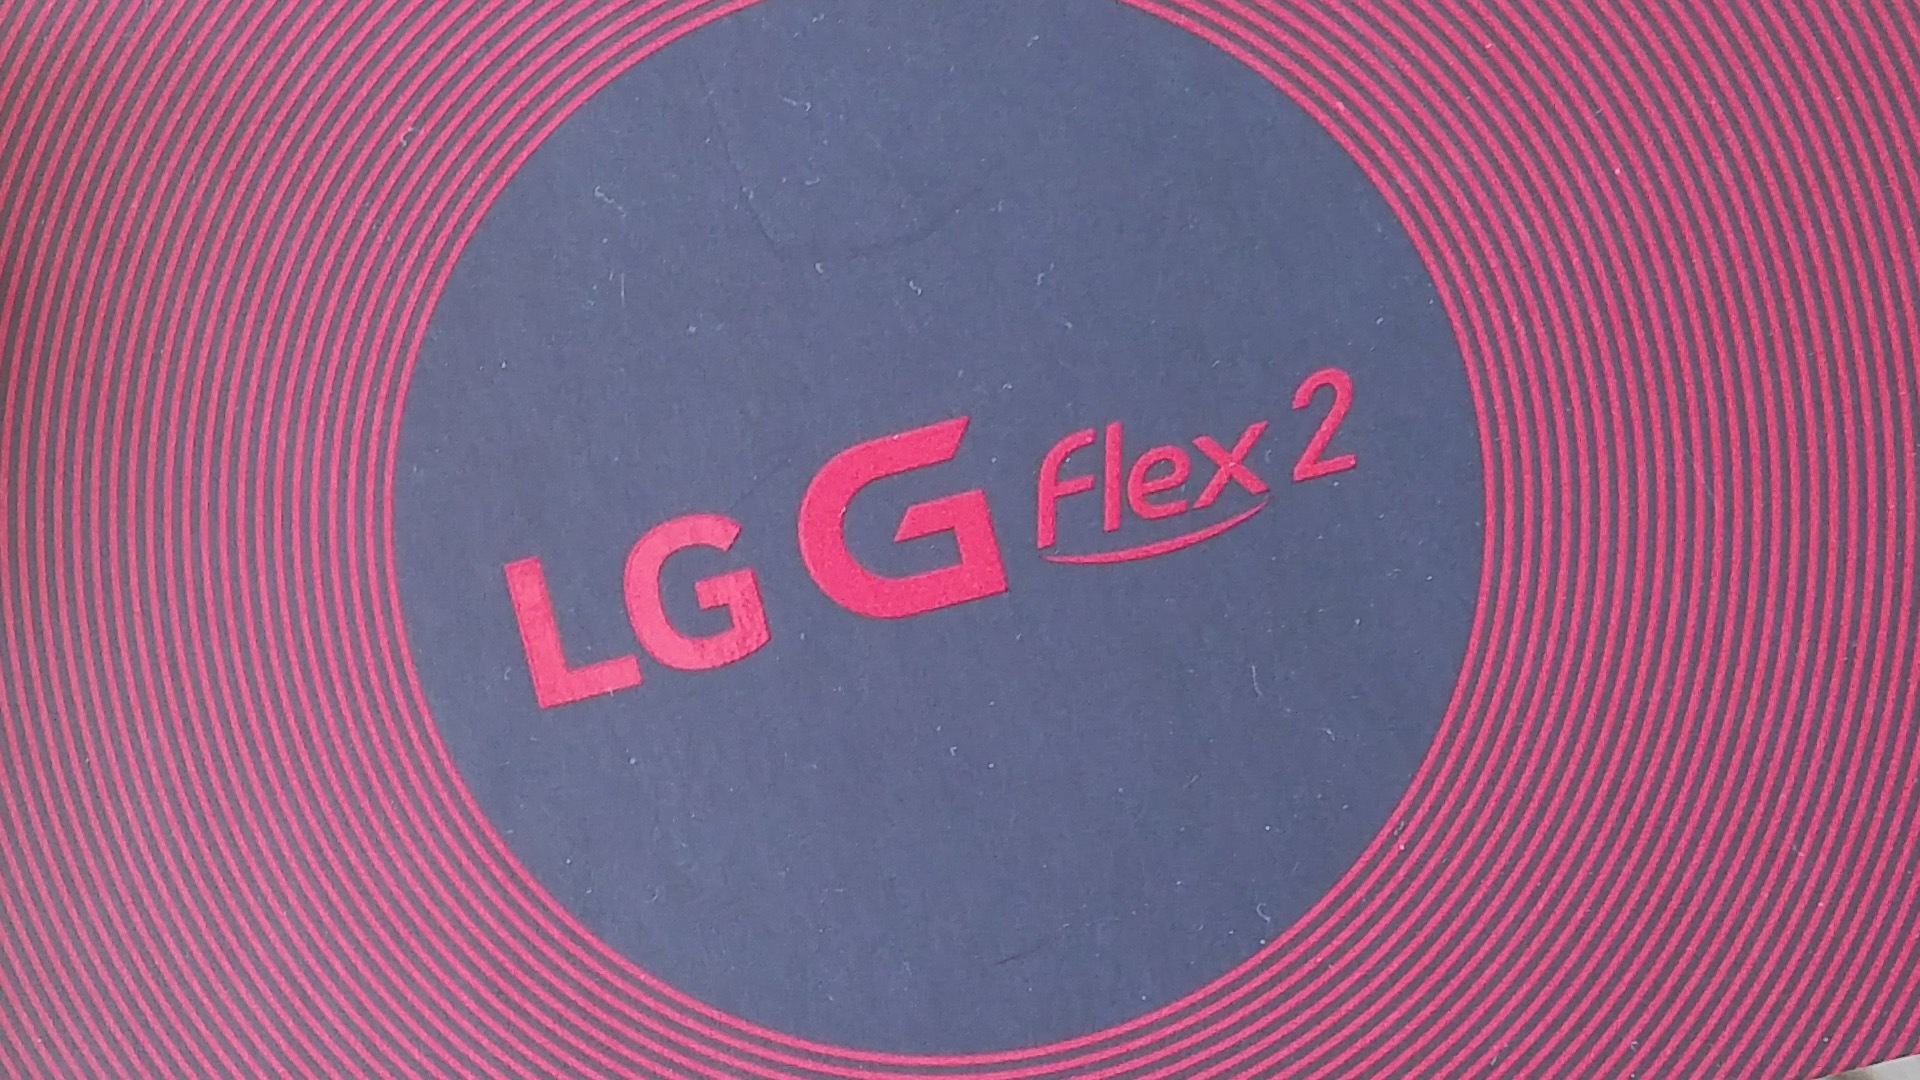 LG G Flex 2 international Giveaway! [CLOSED] - Android Authority